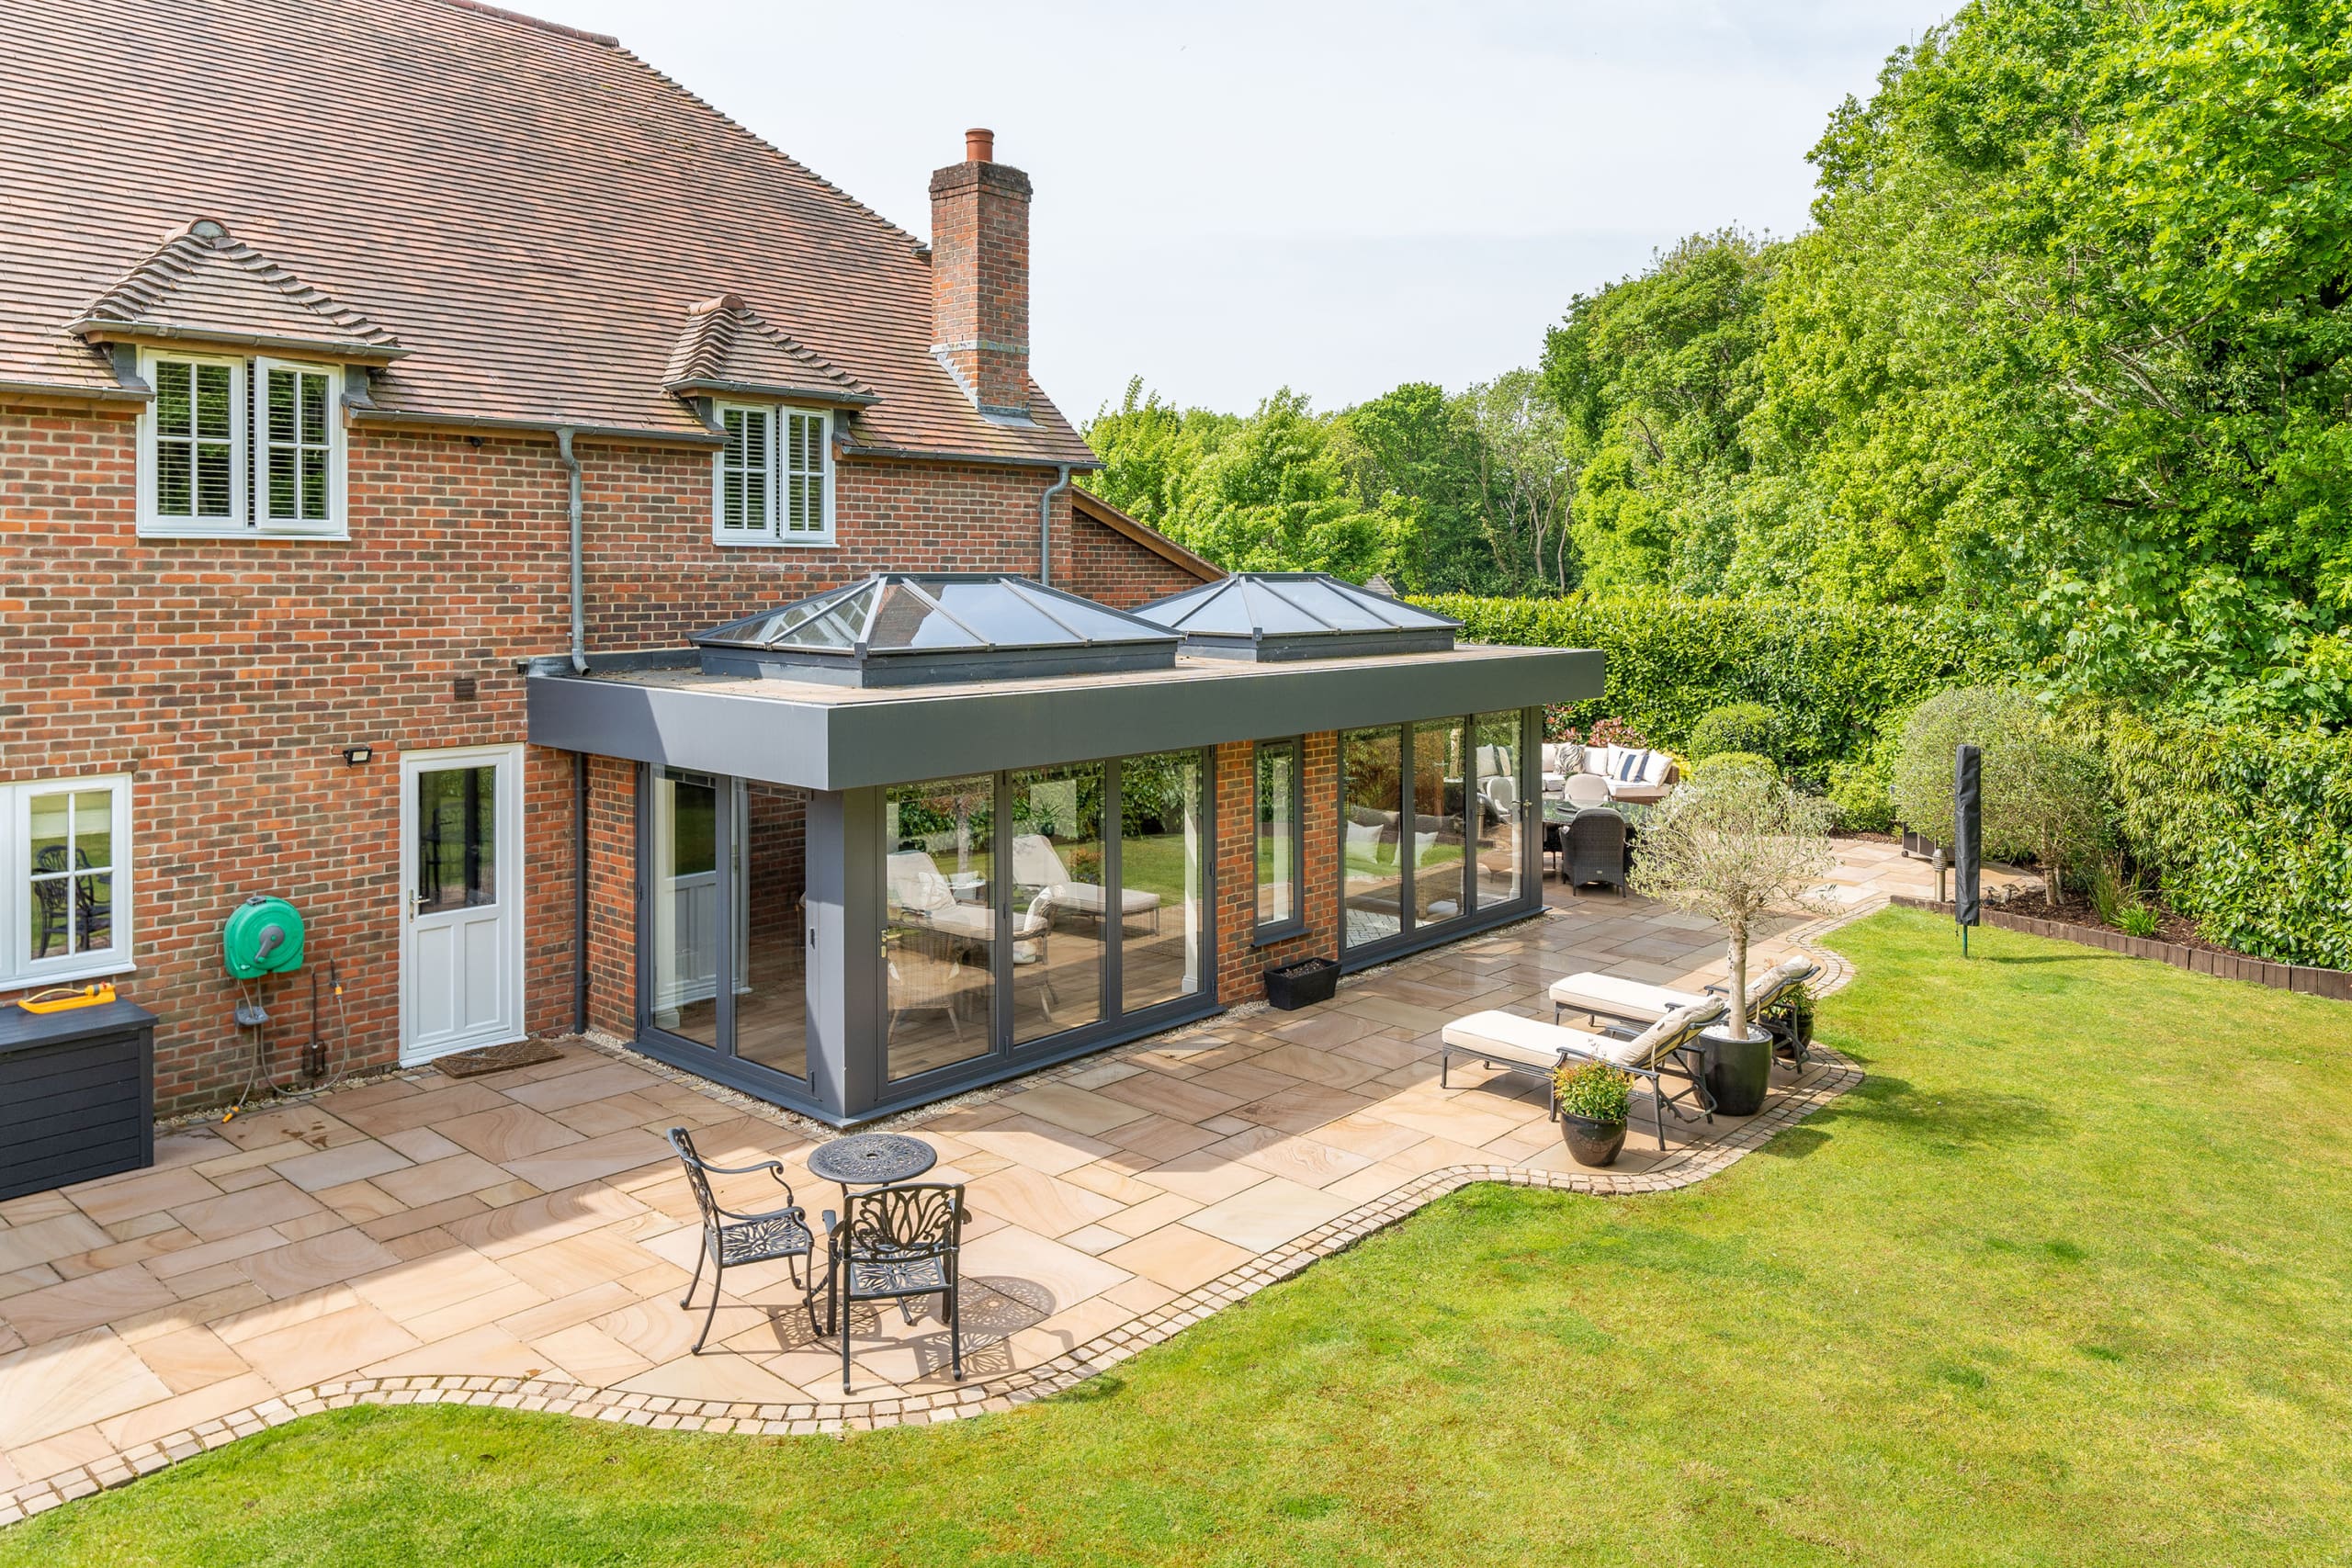 Exterior of an orangery extension with an elevated view of the landscaped garden.